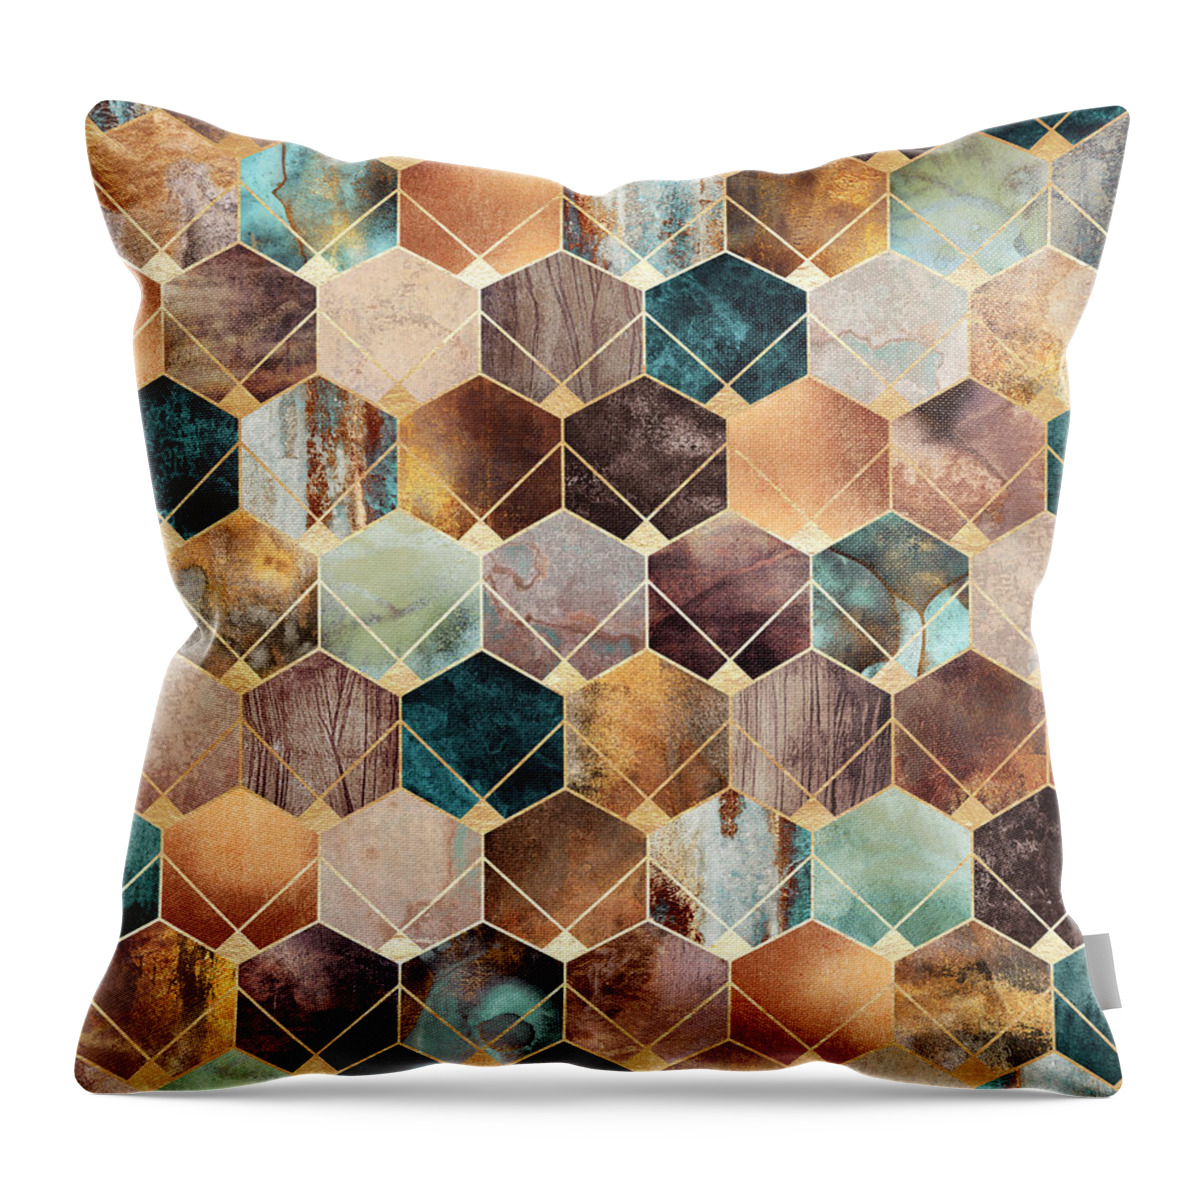 Graphic Throw Pillow featuring the digital art Natural Hexagons And Diamonds by Elisabeth Fredriksson